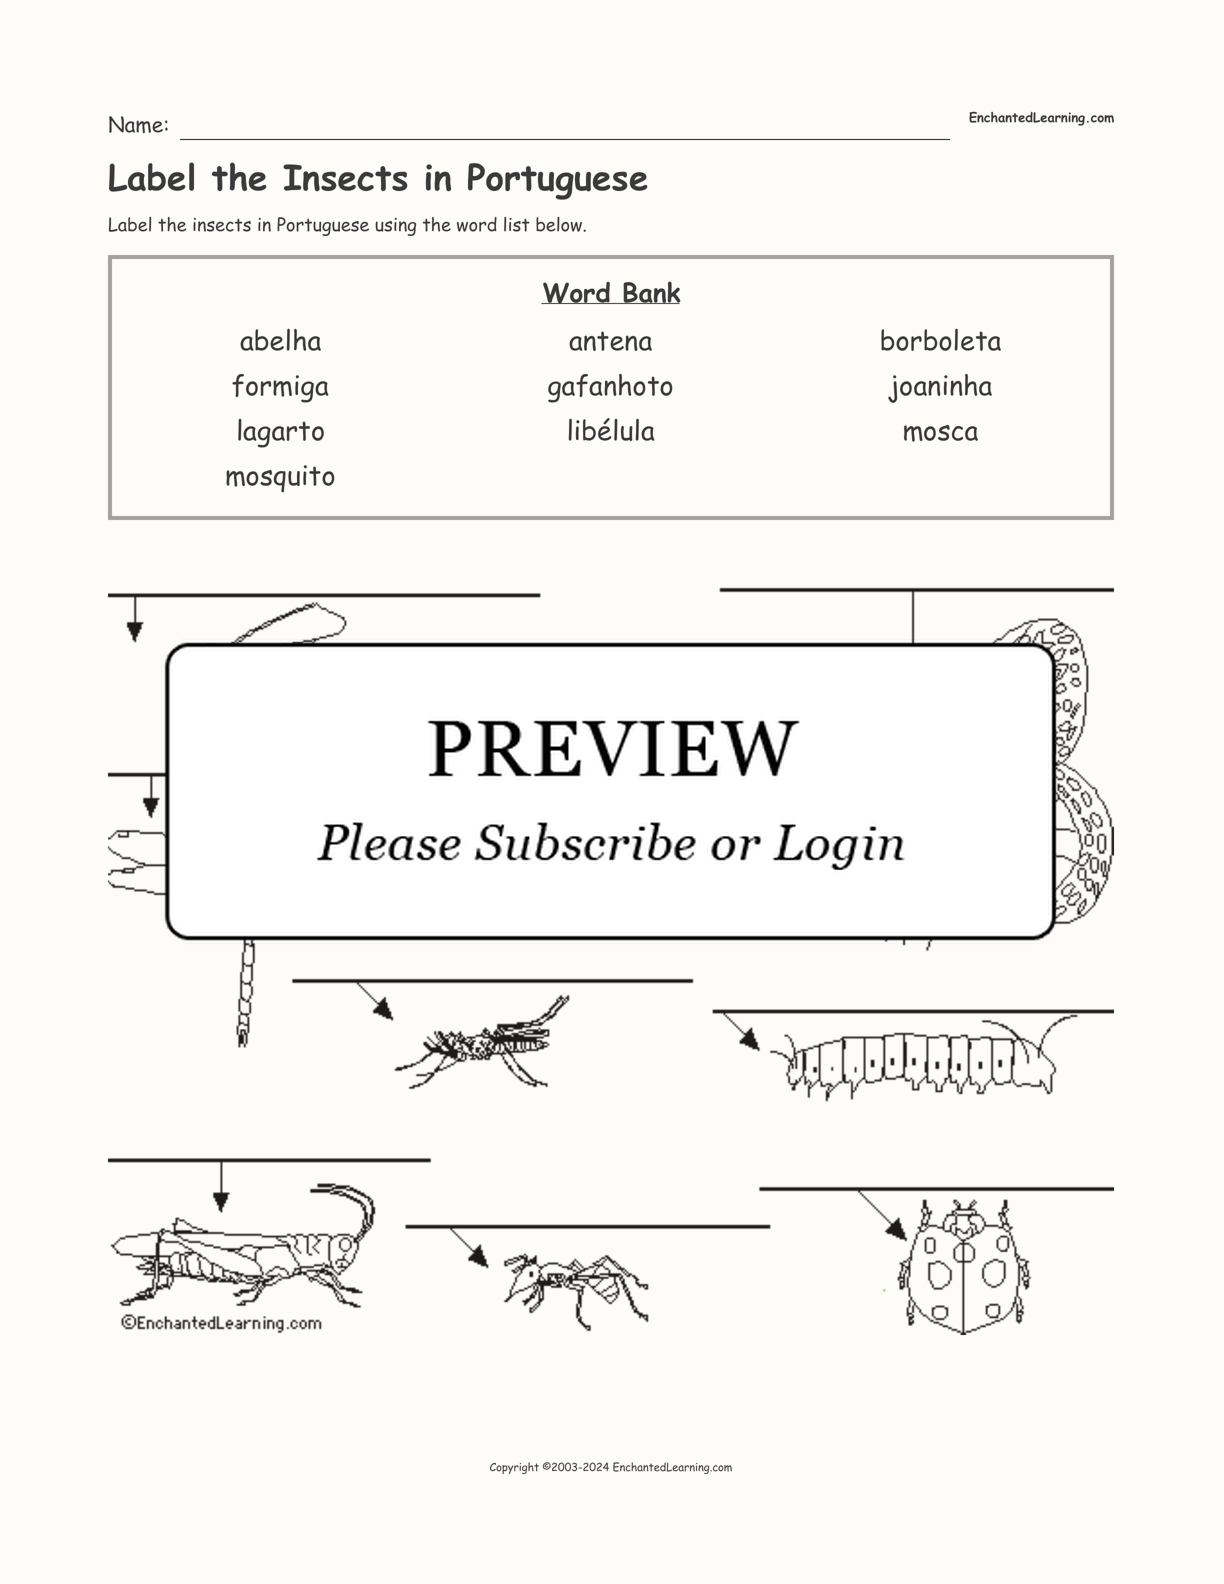 Label the Insects in Portuguese interactive worksheet page 1